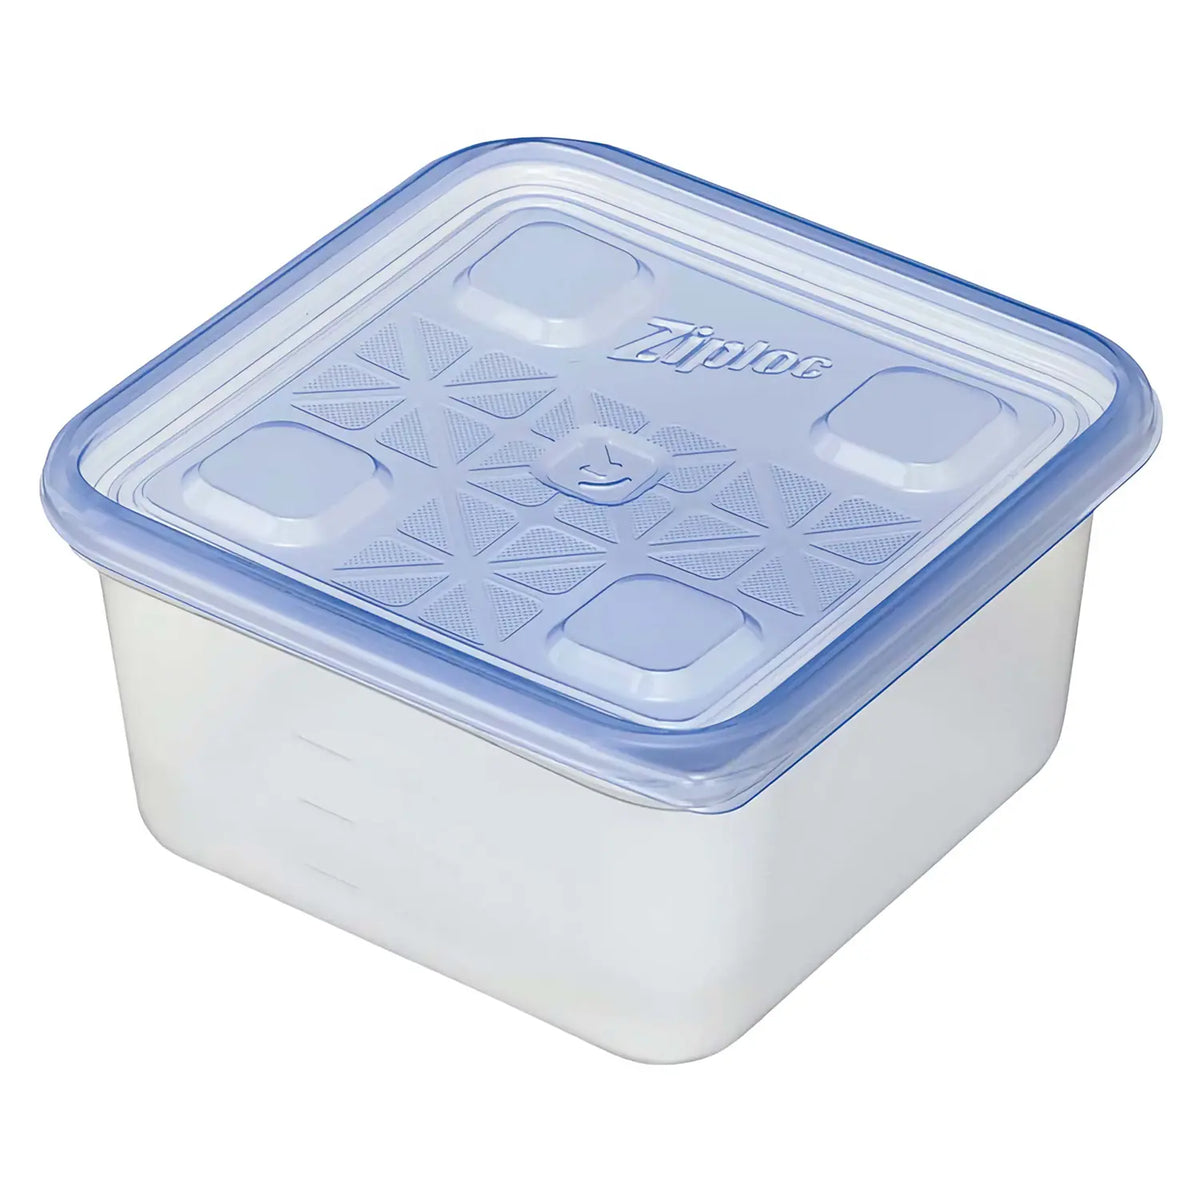 10PCS Disposable Bento Lunch Box Baking Cake Food Containers